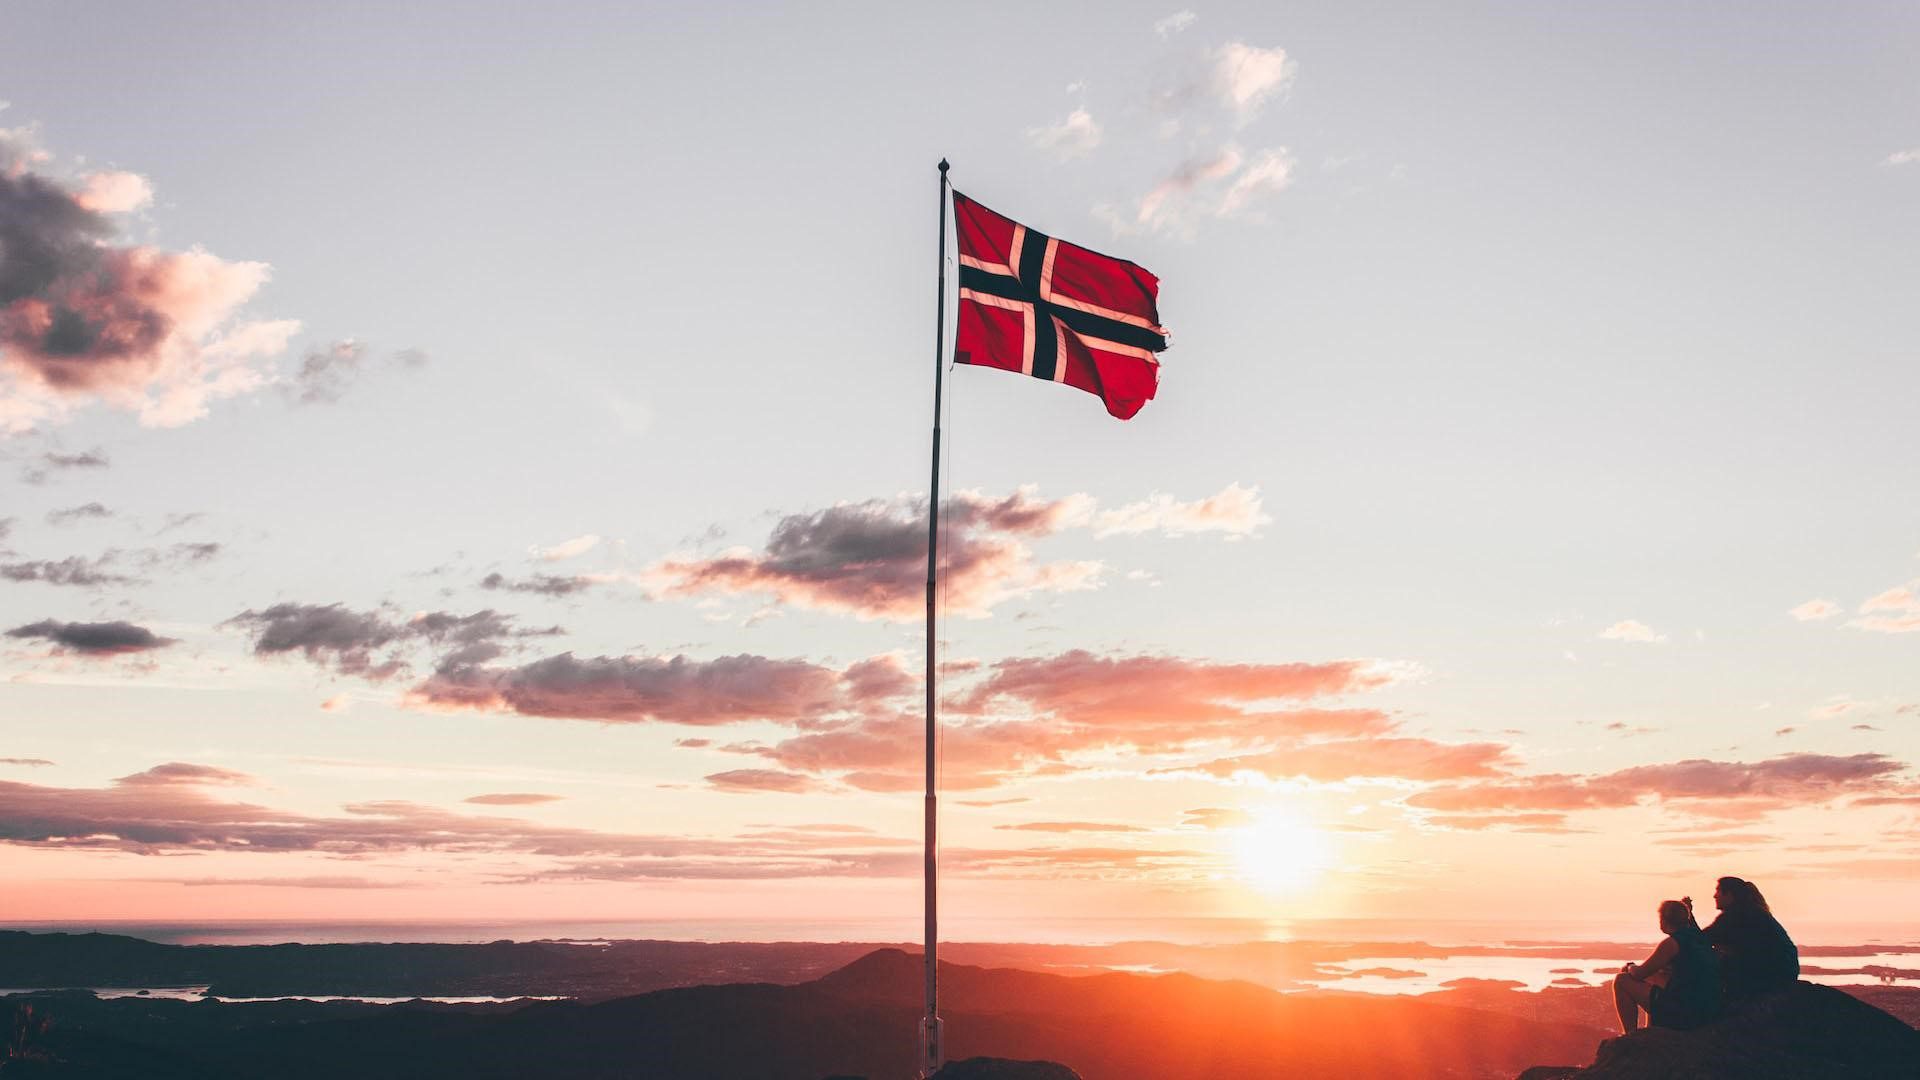 An image or the Norwegian flag at sunset